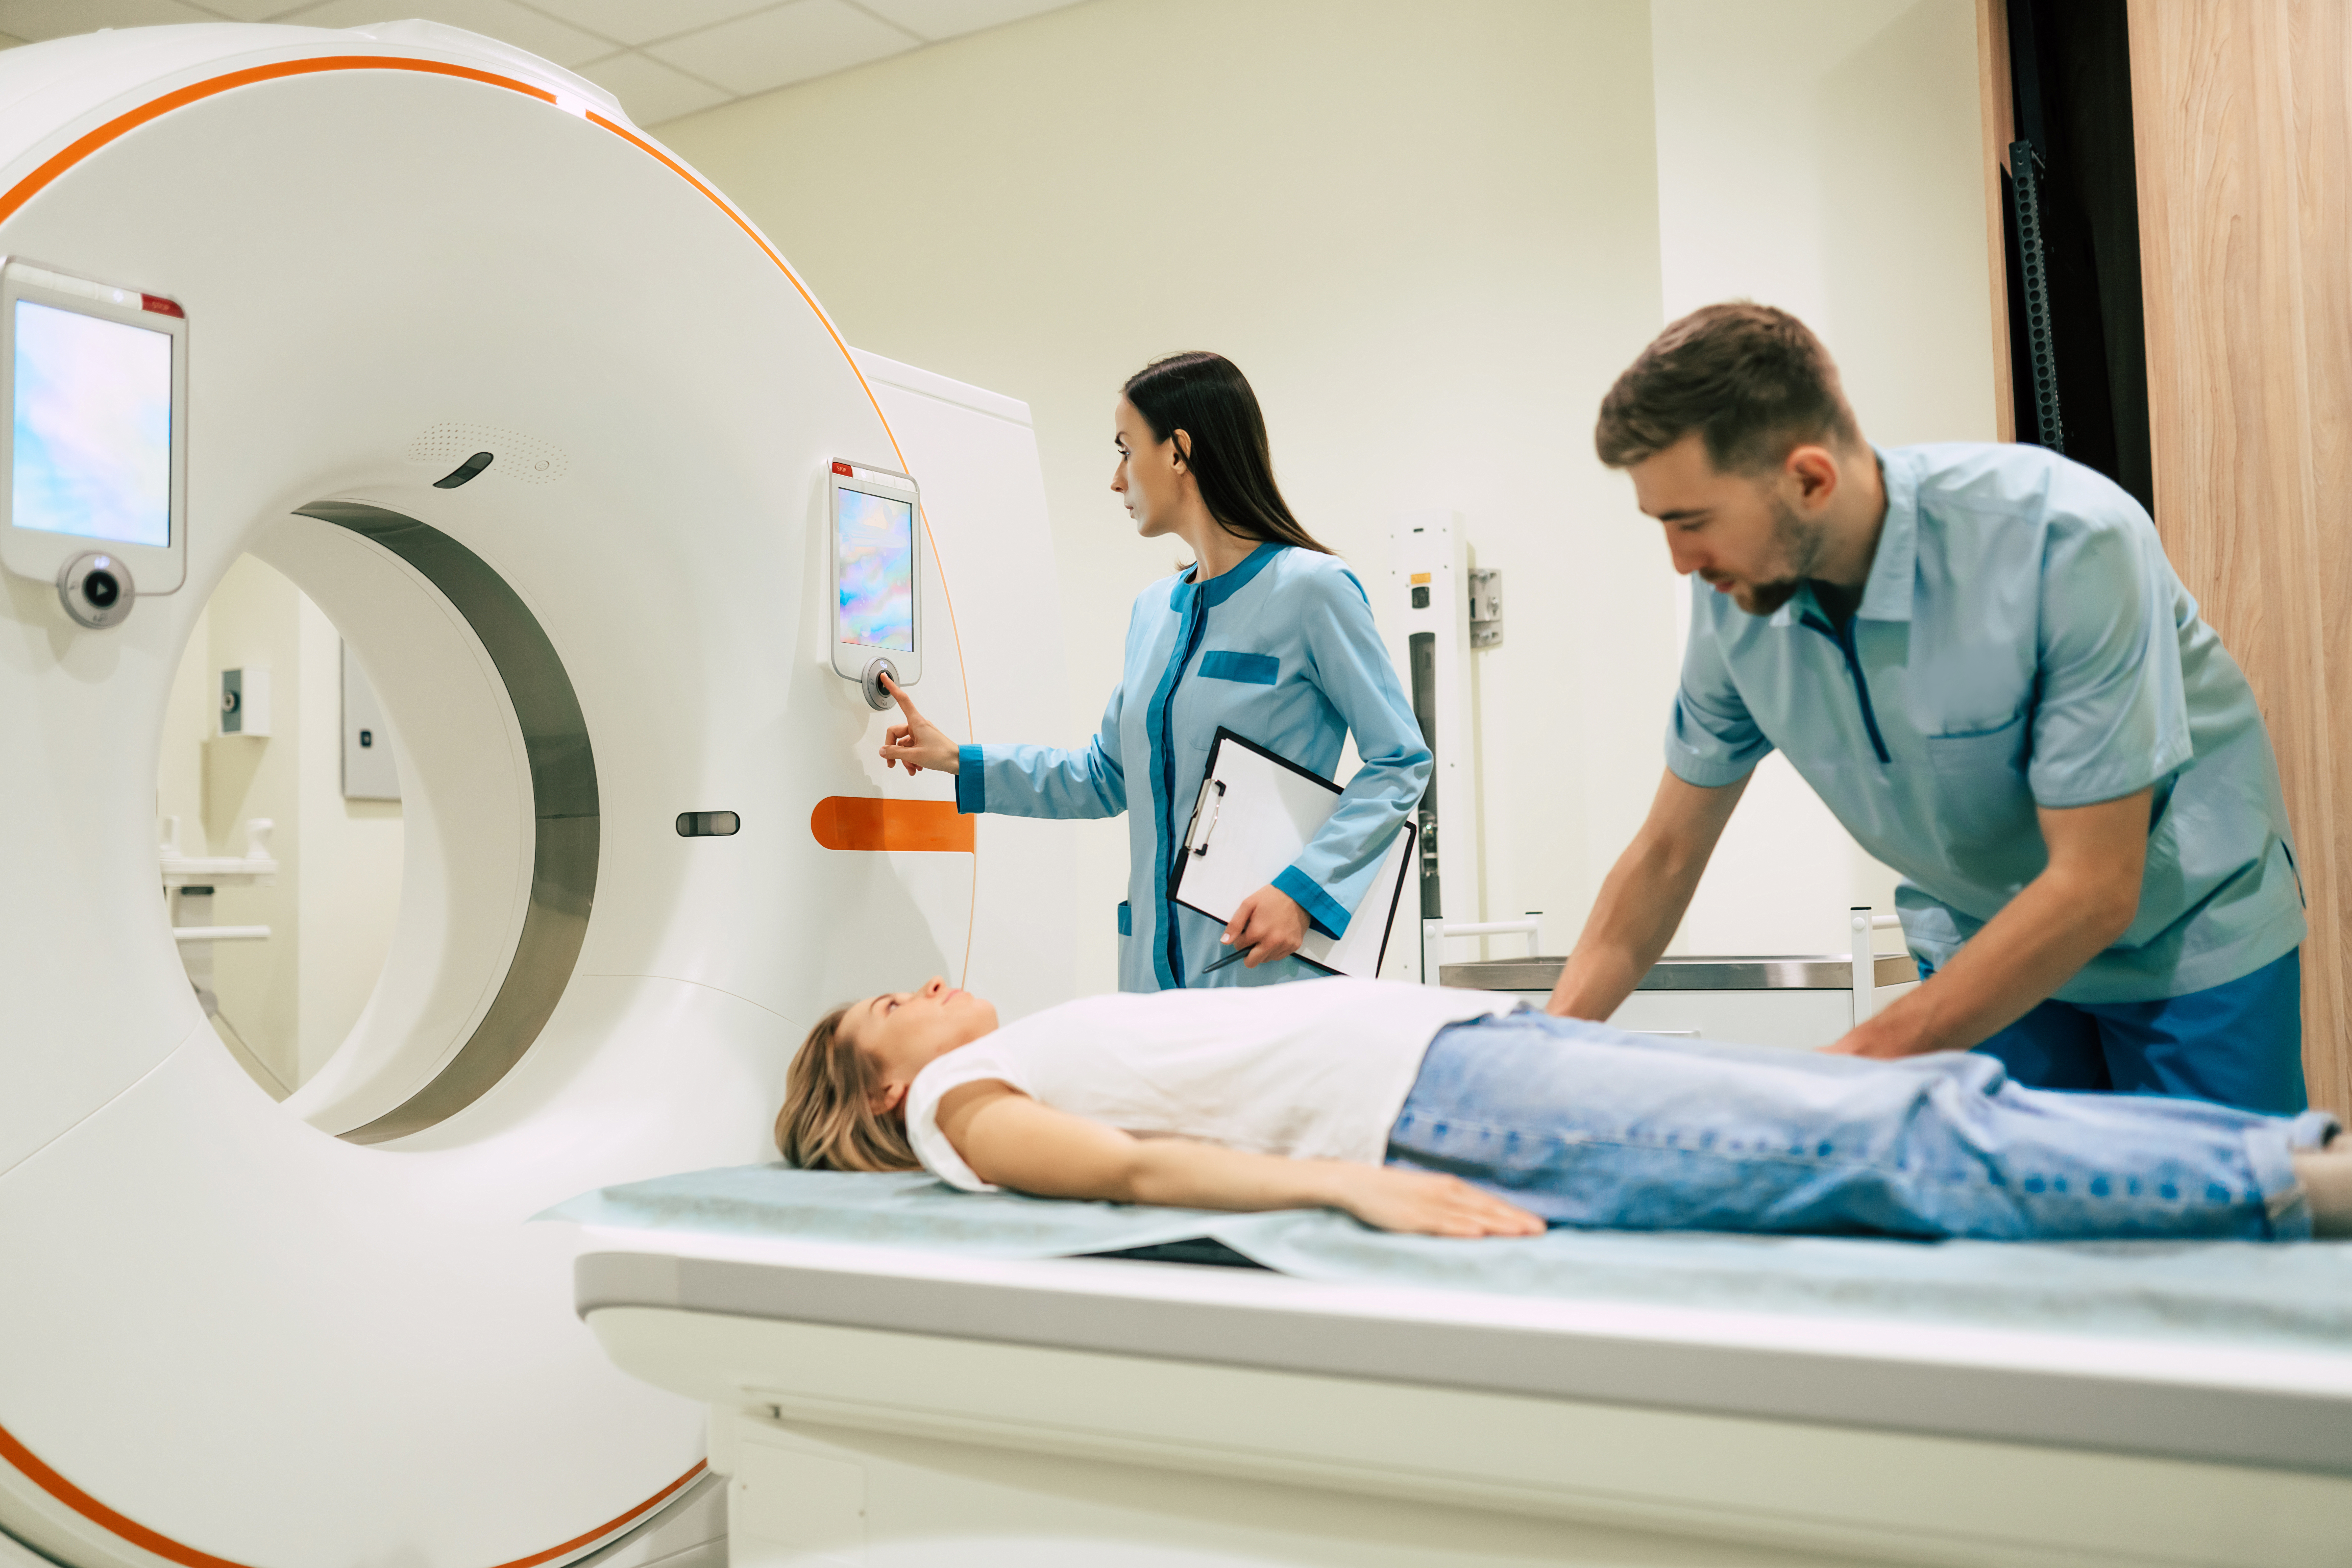 Study: New AI Scan Strategy Can Cut Radiation Exposure in Half